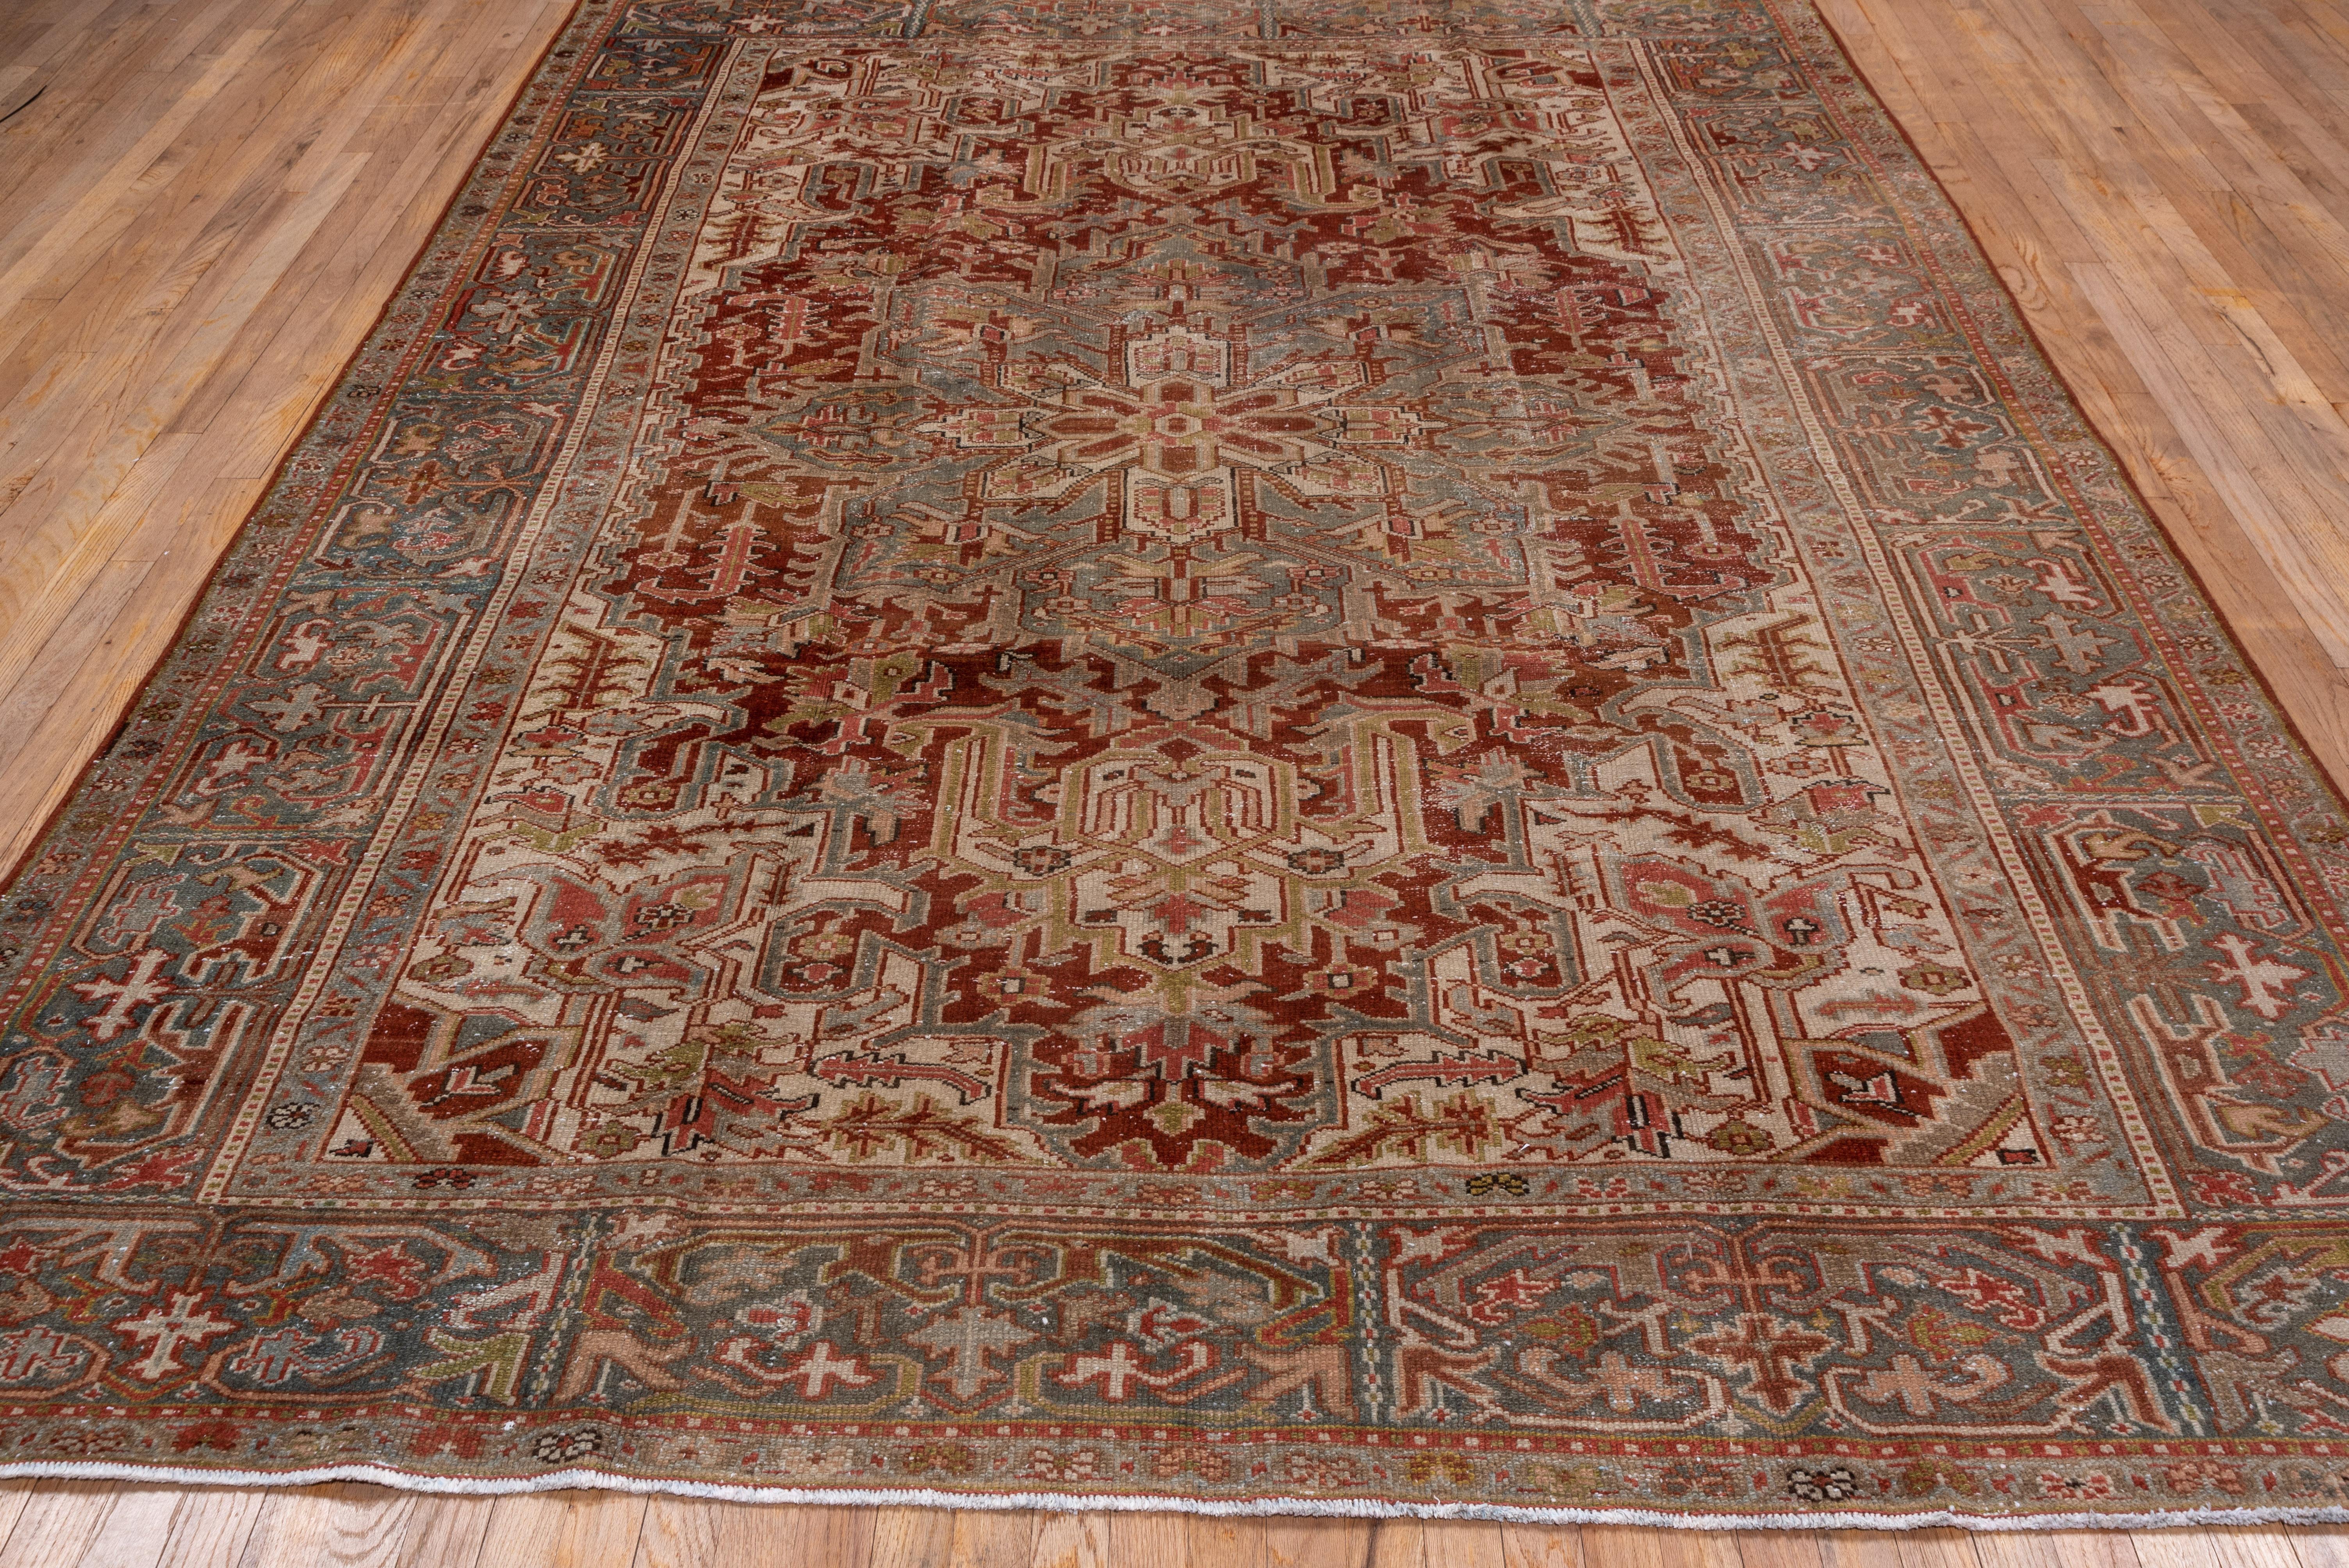 Hand-Knotted Colorful Antique Persian Karaje Rug, Circa 1930s For Sale